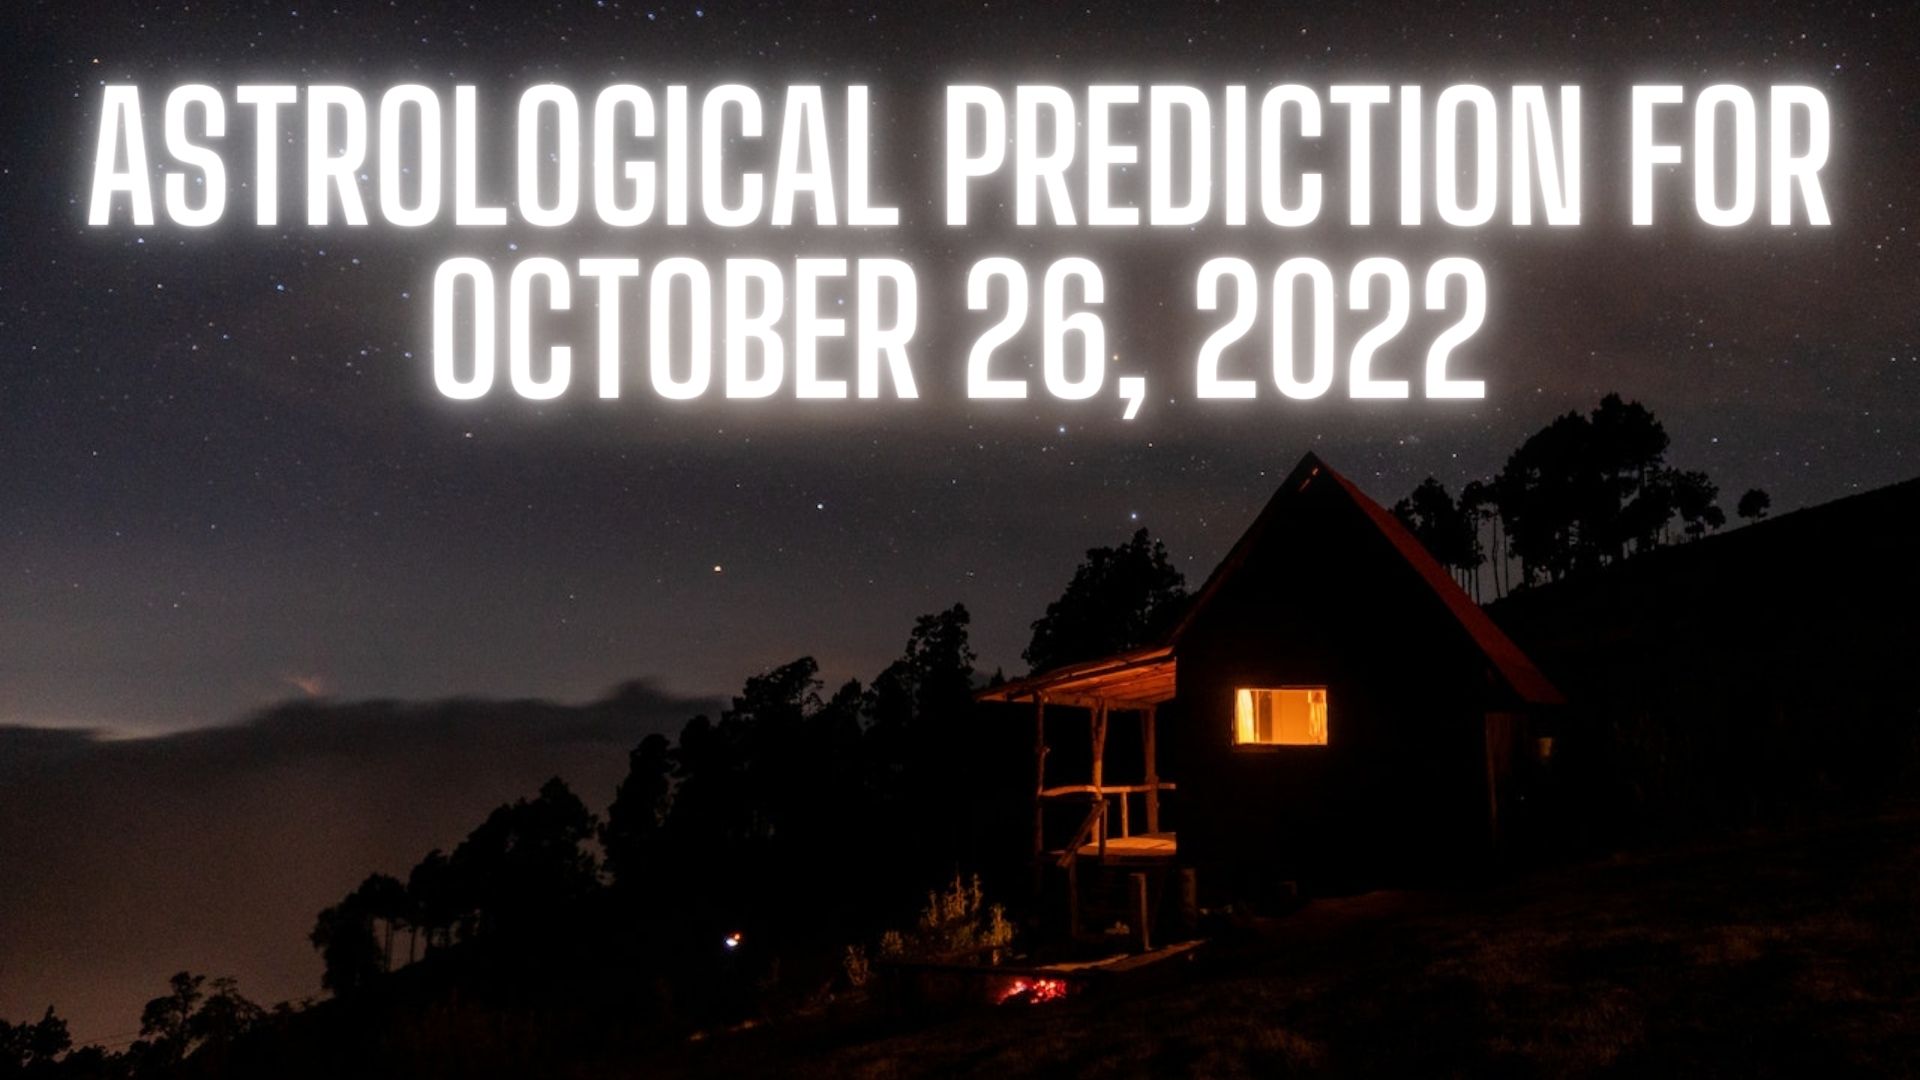 Horoscope Today - Astrological Prediction For October 26, 2022